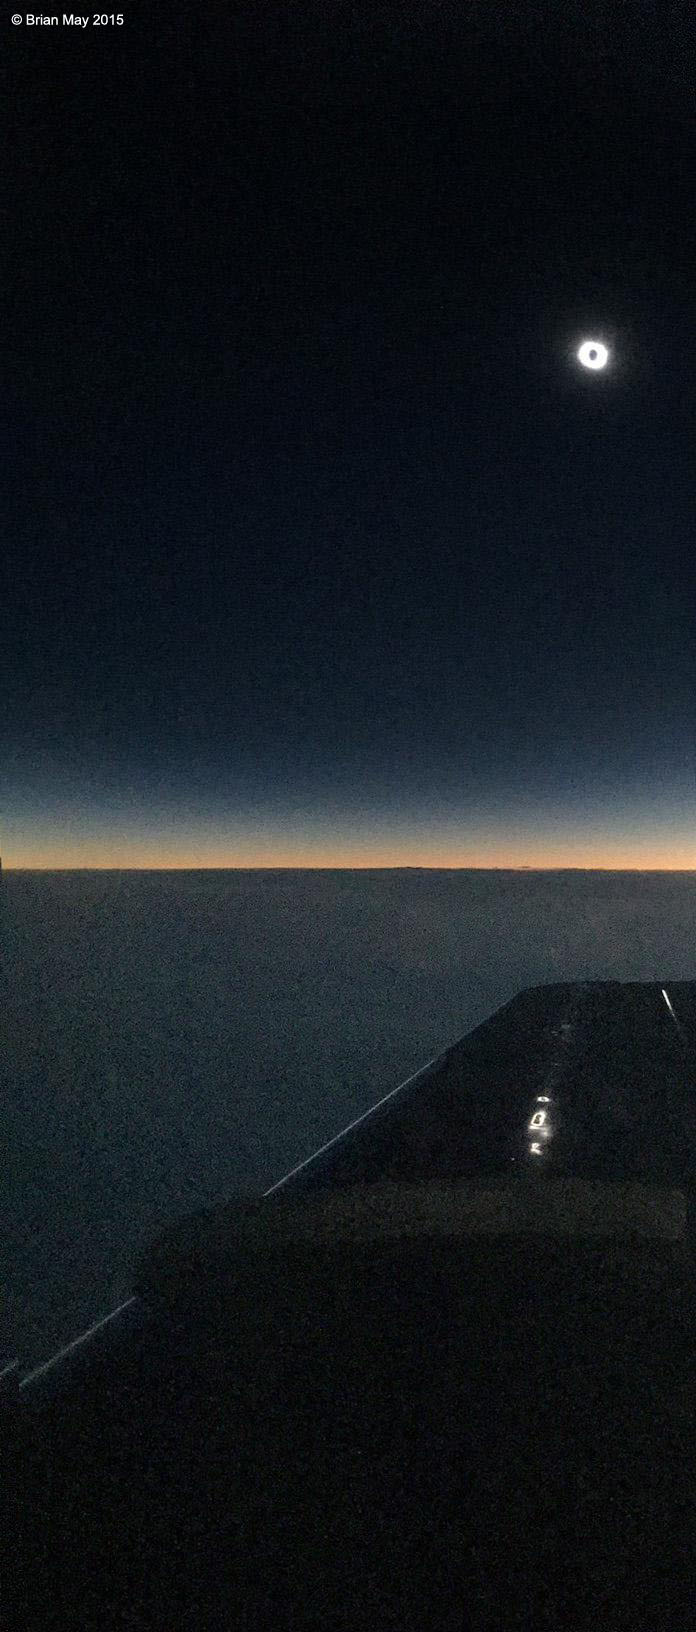 Eclipse from plane over Faroes